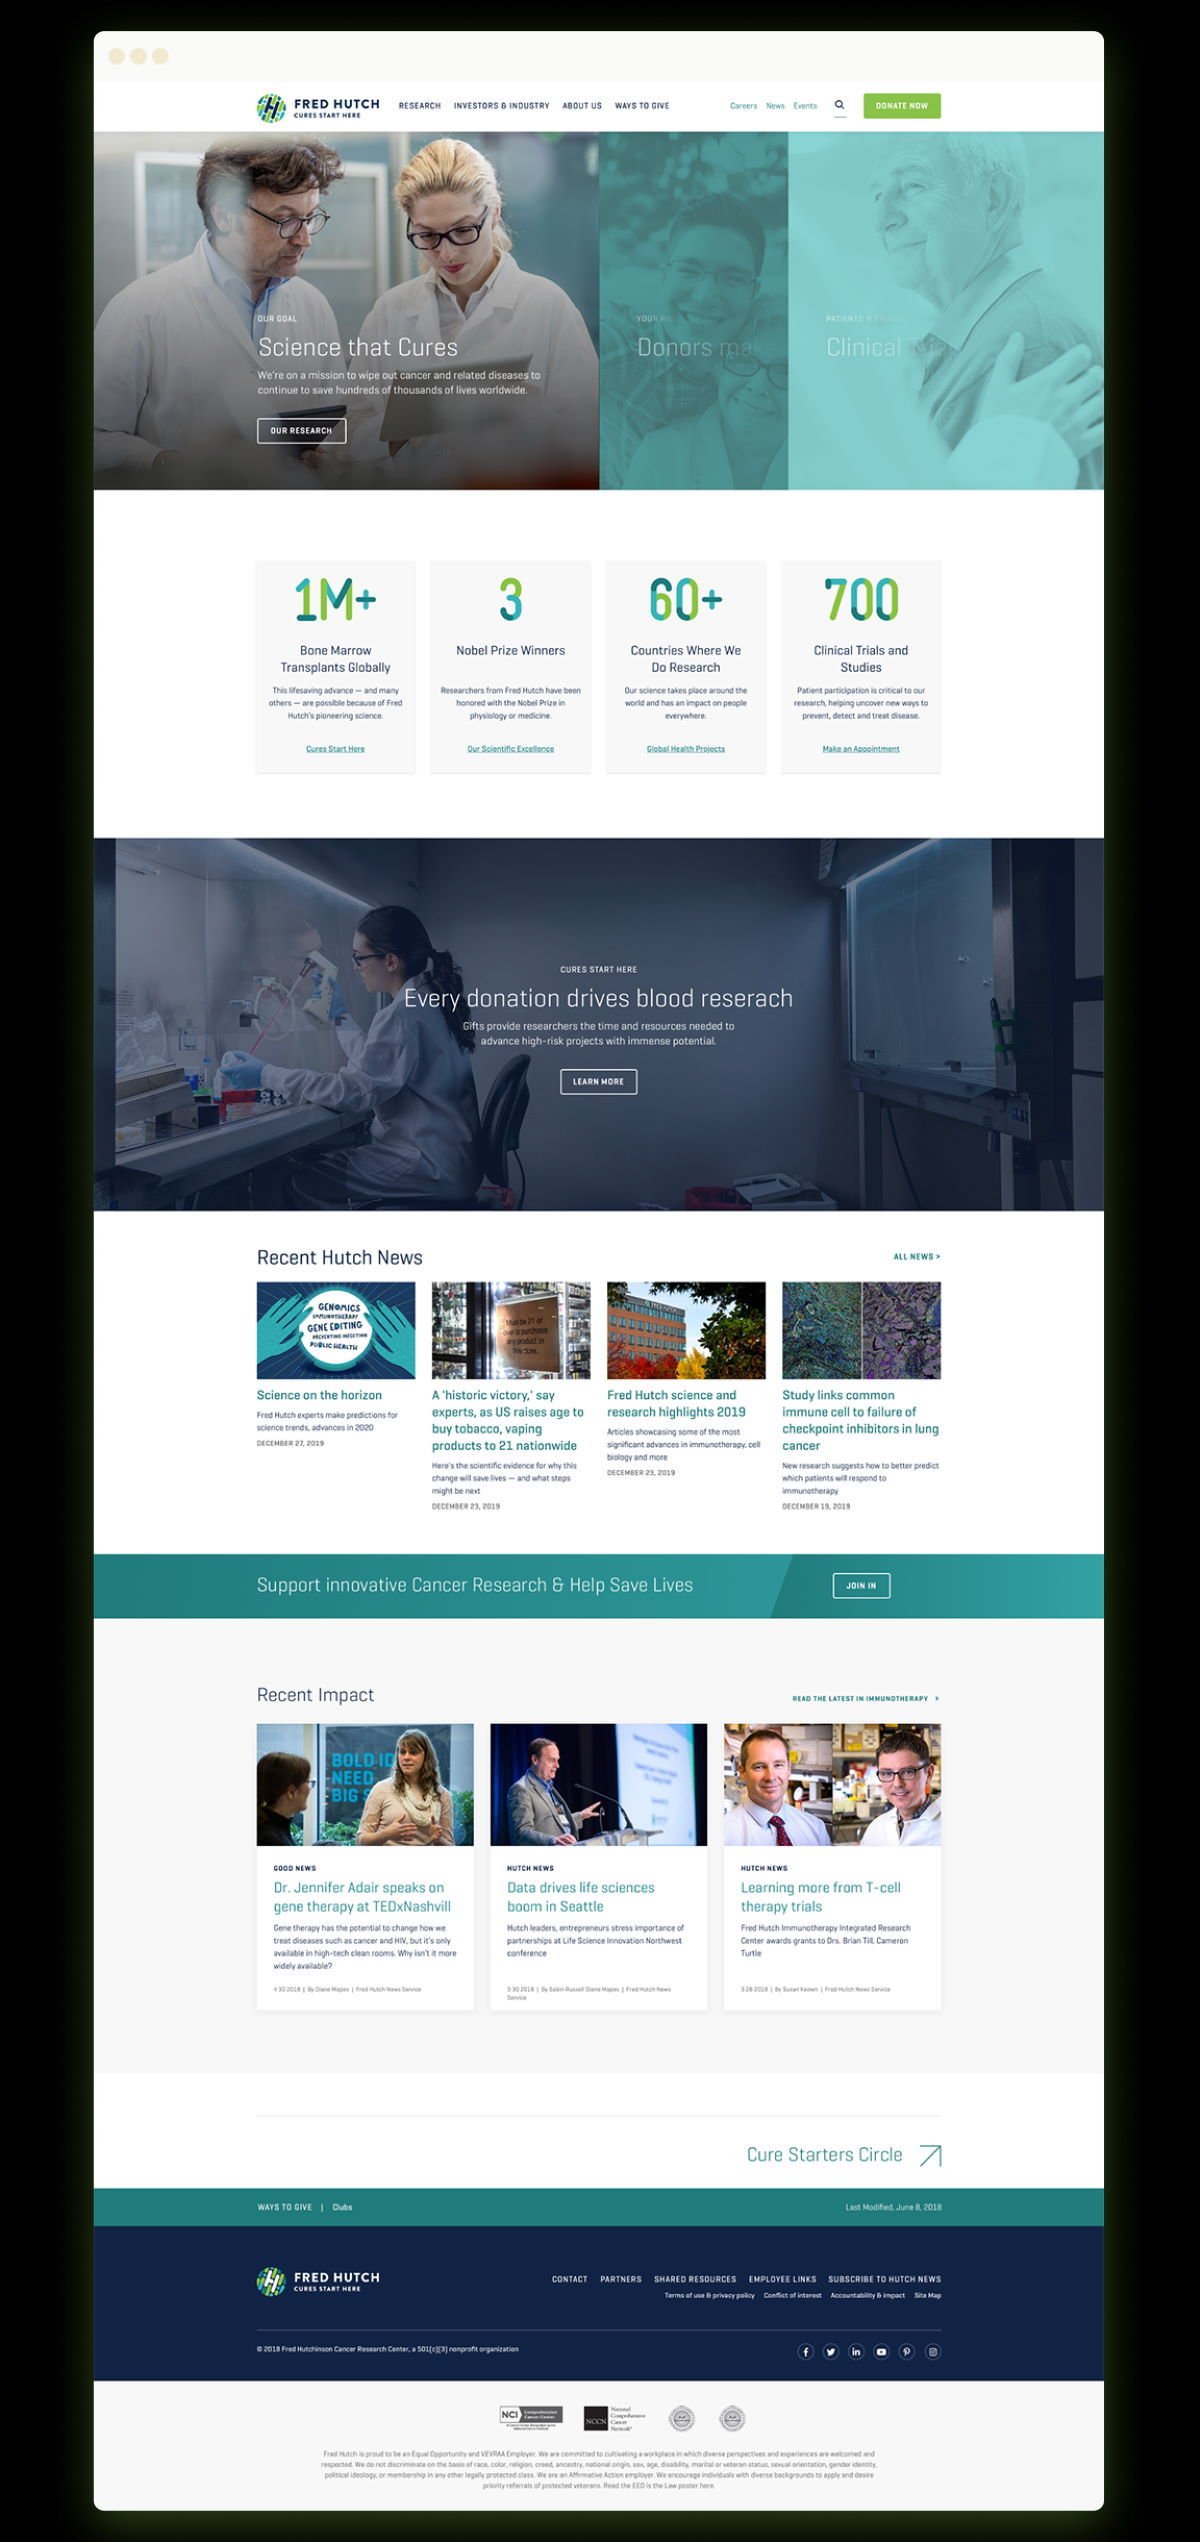 Home page of Fred Hutch's new website prototype.